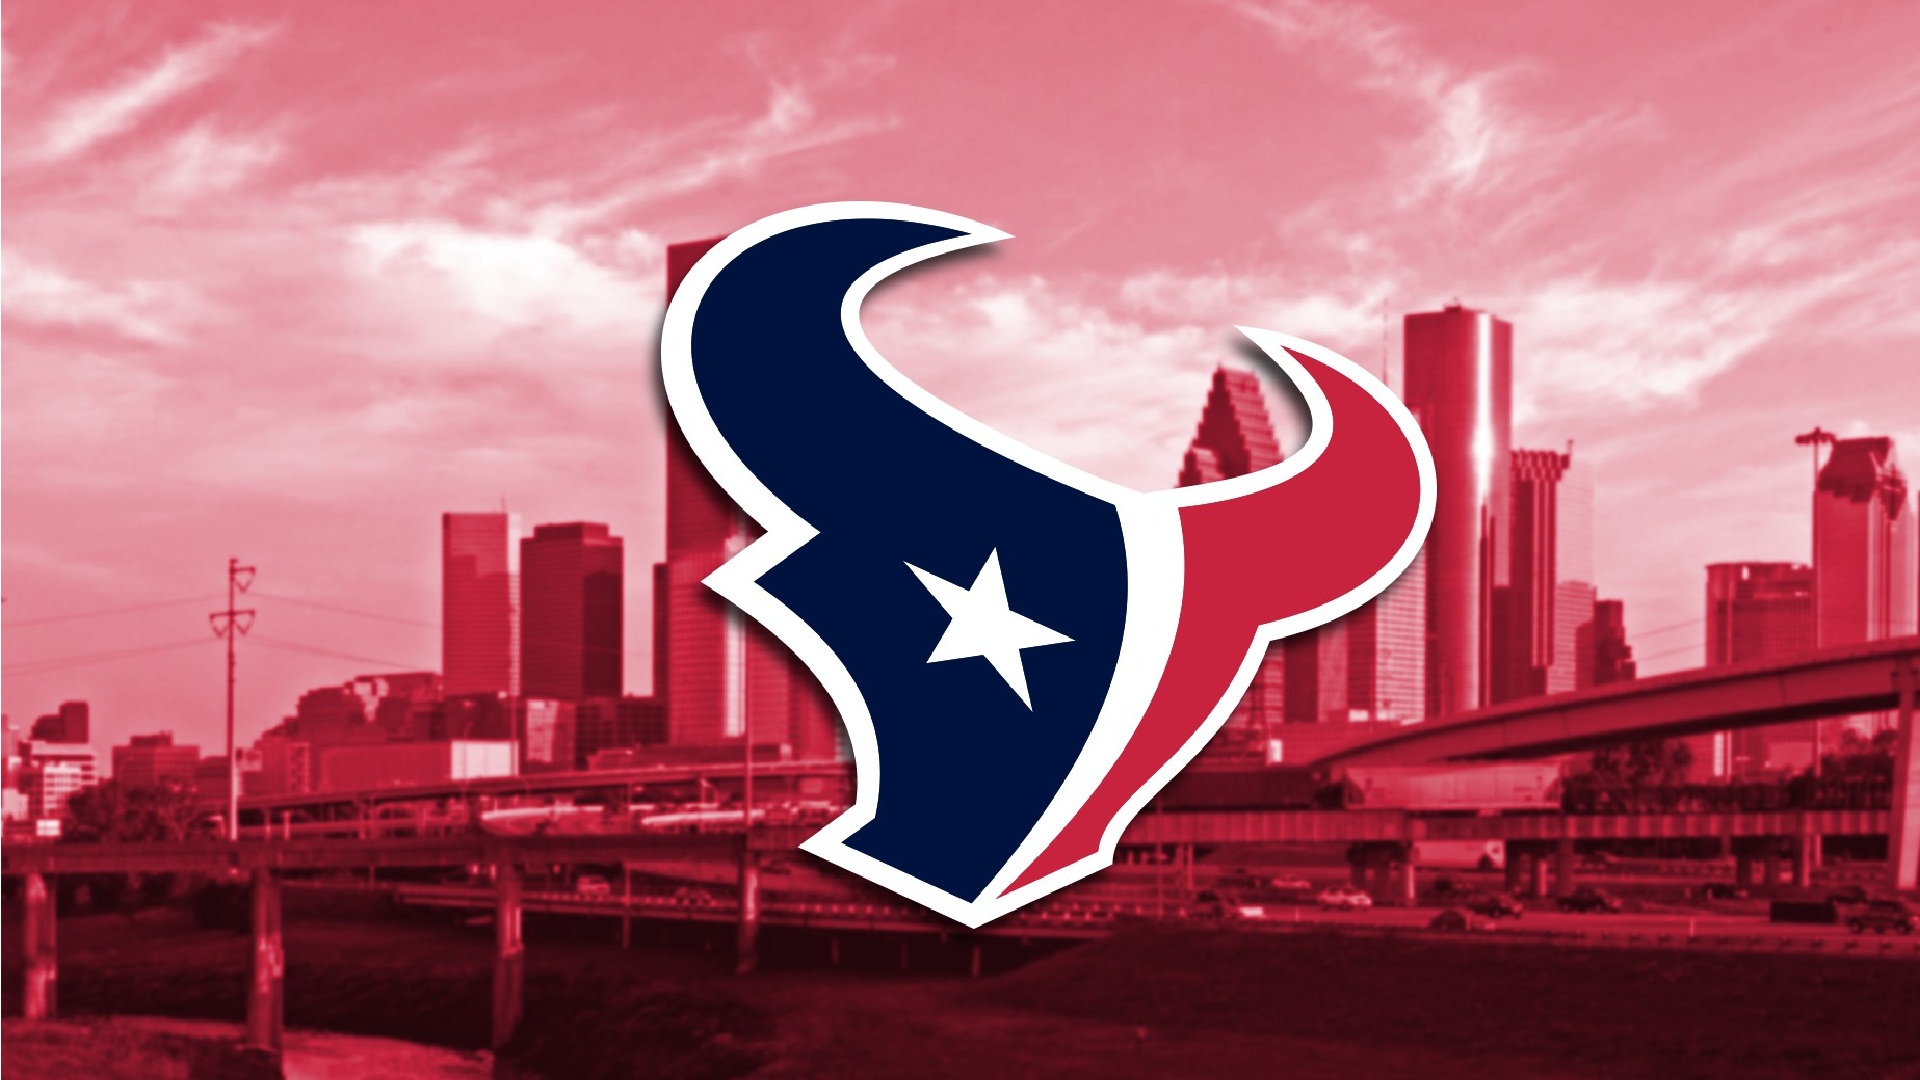 HD Desktop Wallpaper Houston Texans NFL With Resolution 1920X1080 pixel. You can make this wallpaper for your Mac or Windows Desktop Background, iPhone, Android or Tablet and another Smartphone device for free